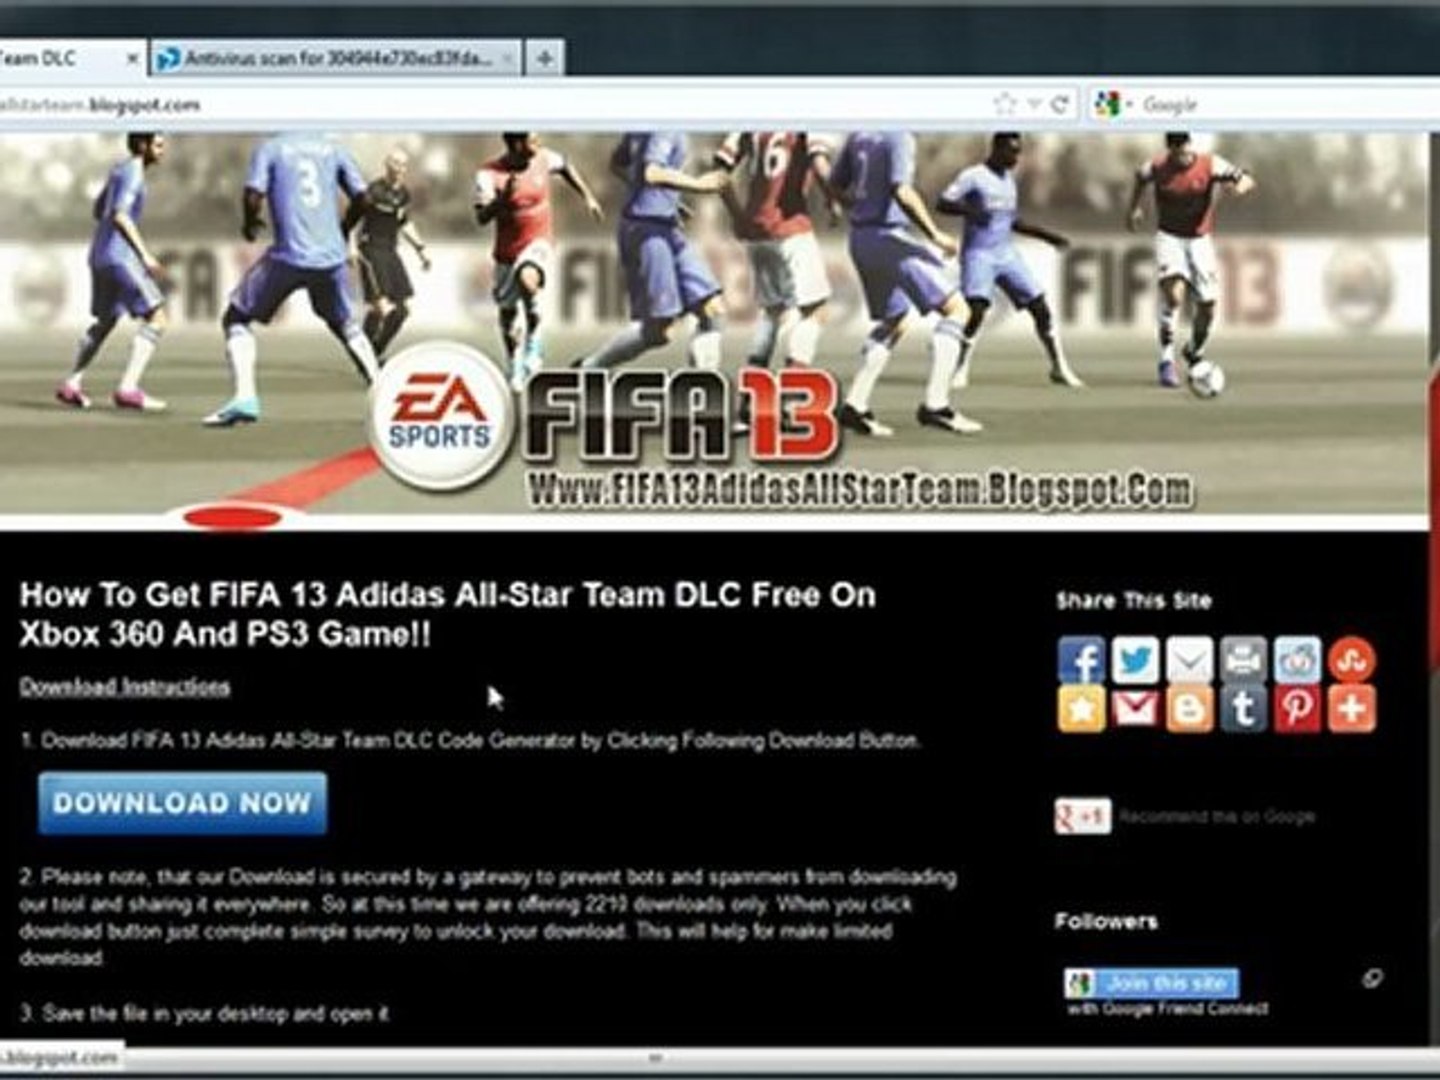 How to Get FIFA 13 Adidas All-Star Team DLC Free!! - video dailymotion